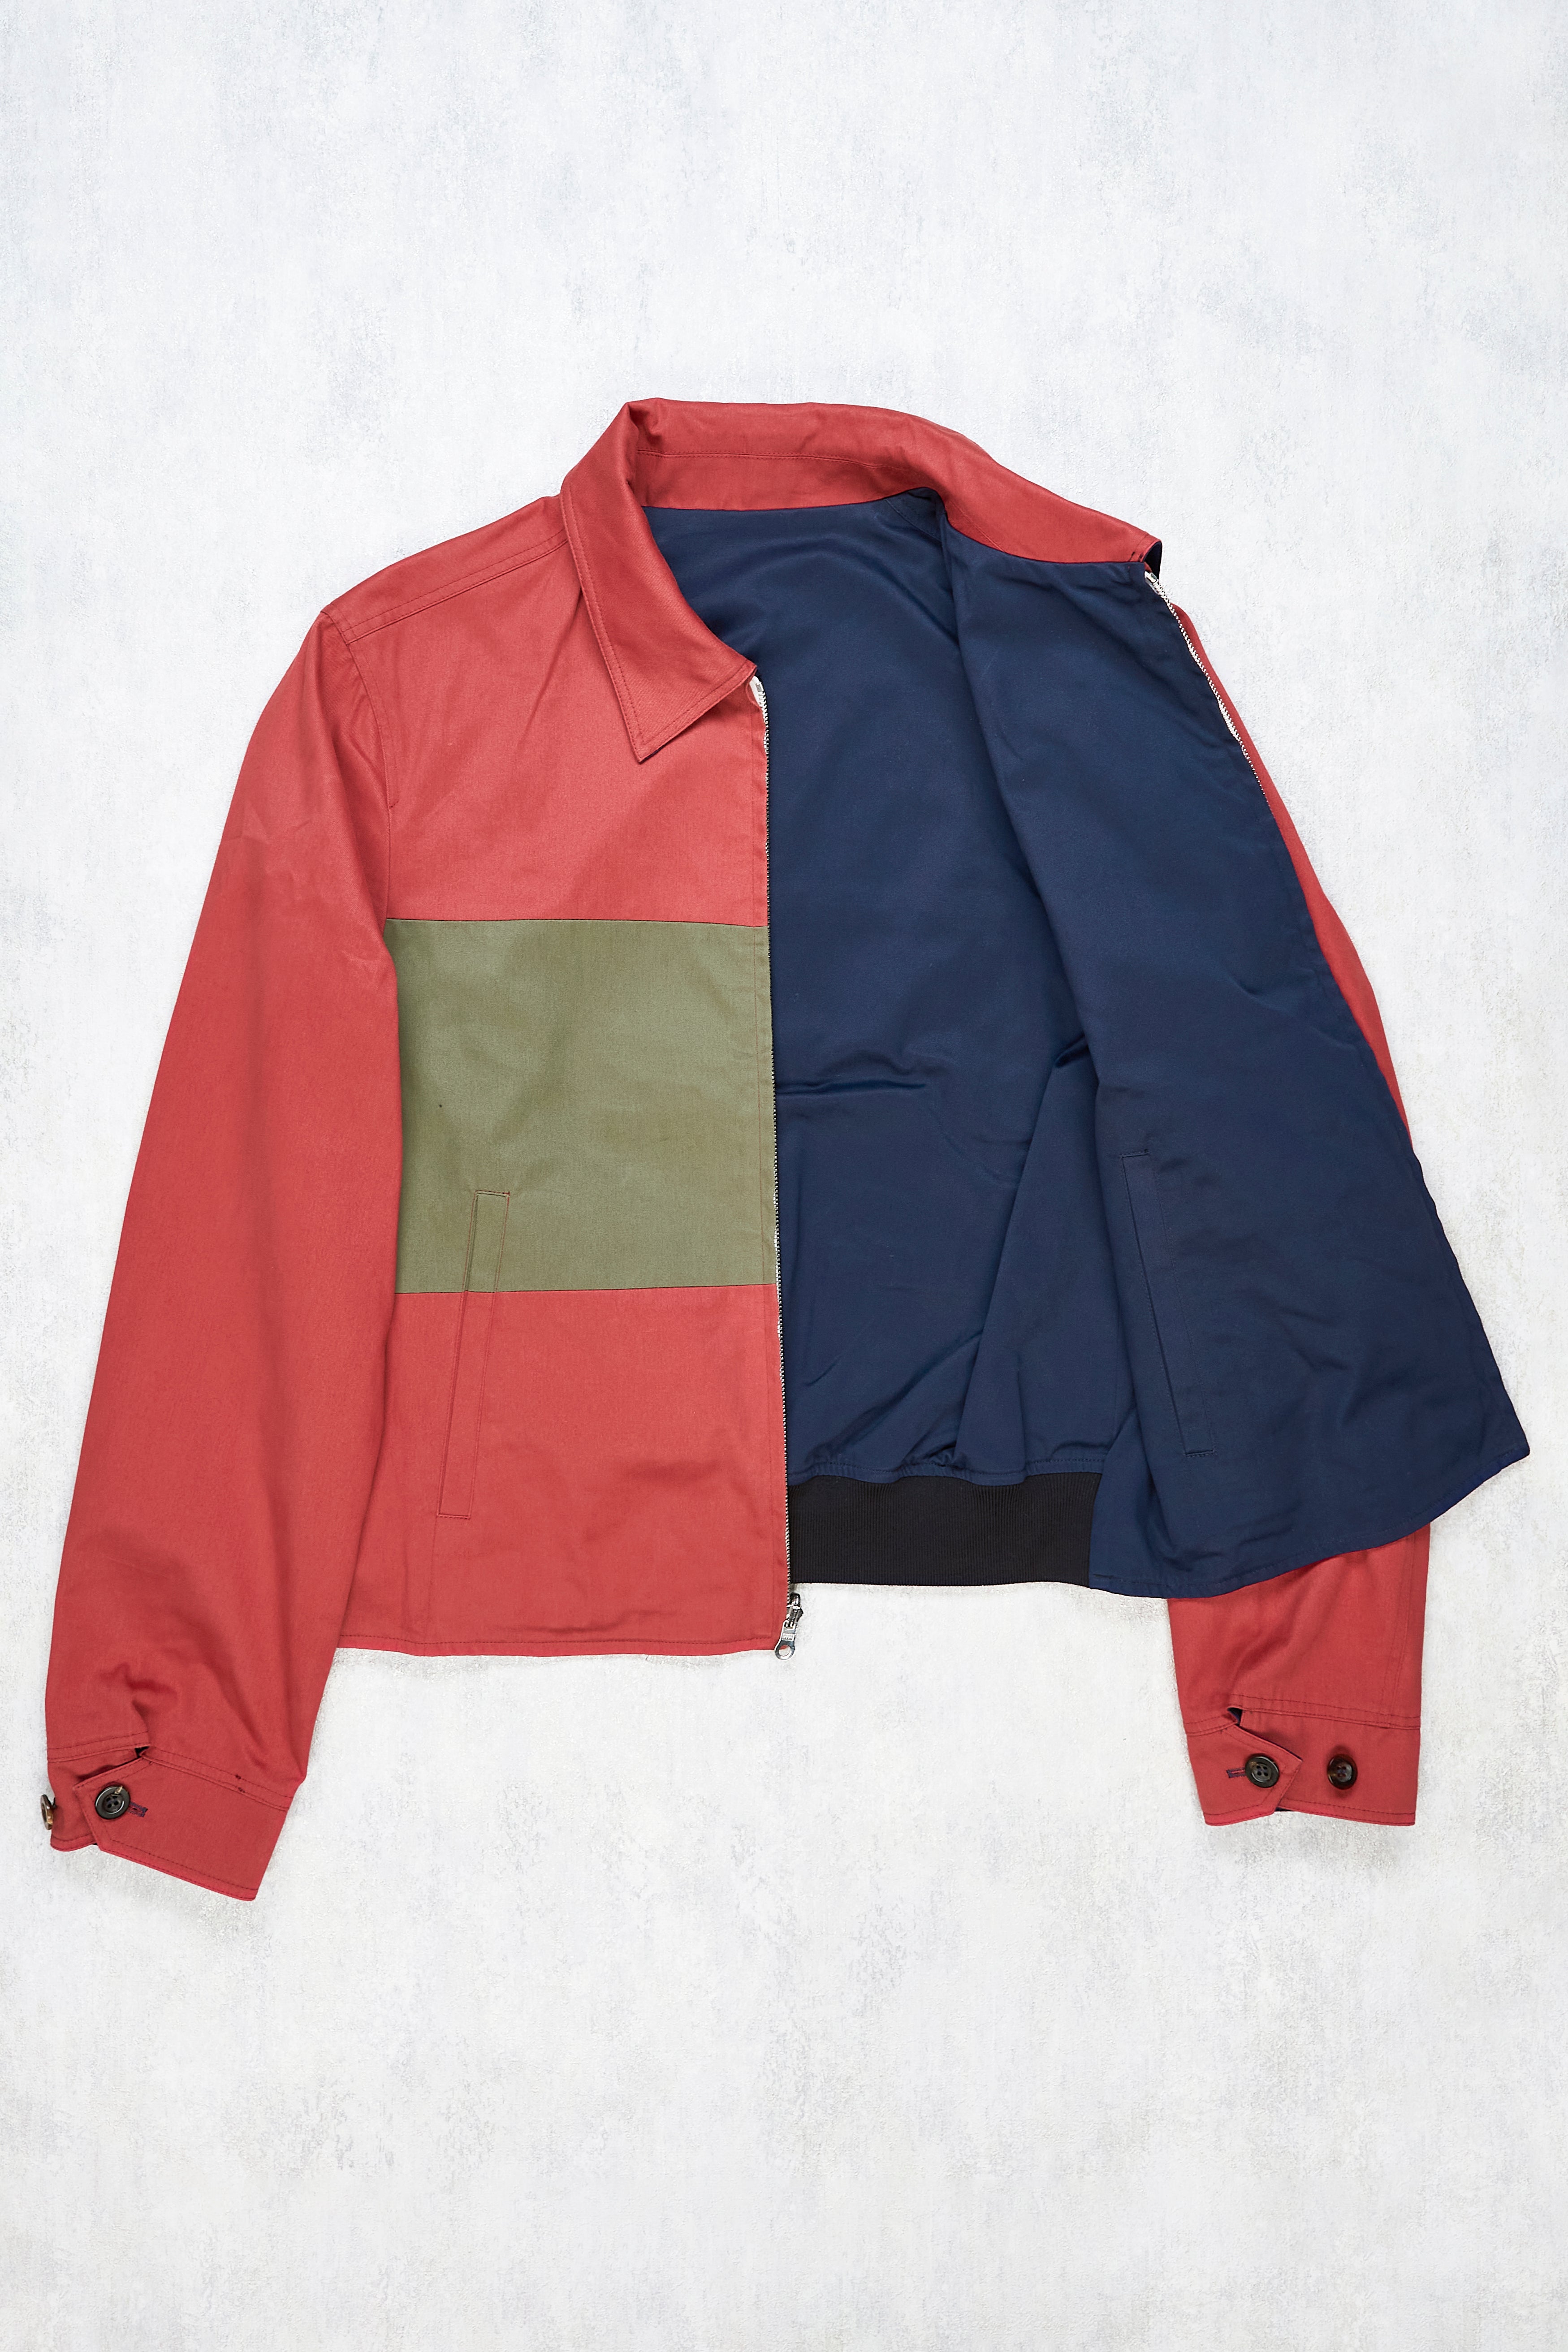 Drake's Red/Green and Navy Reverso Jacket